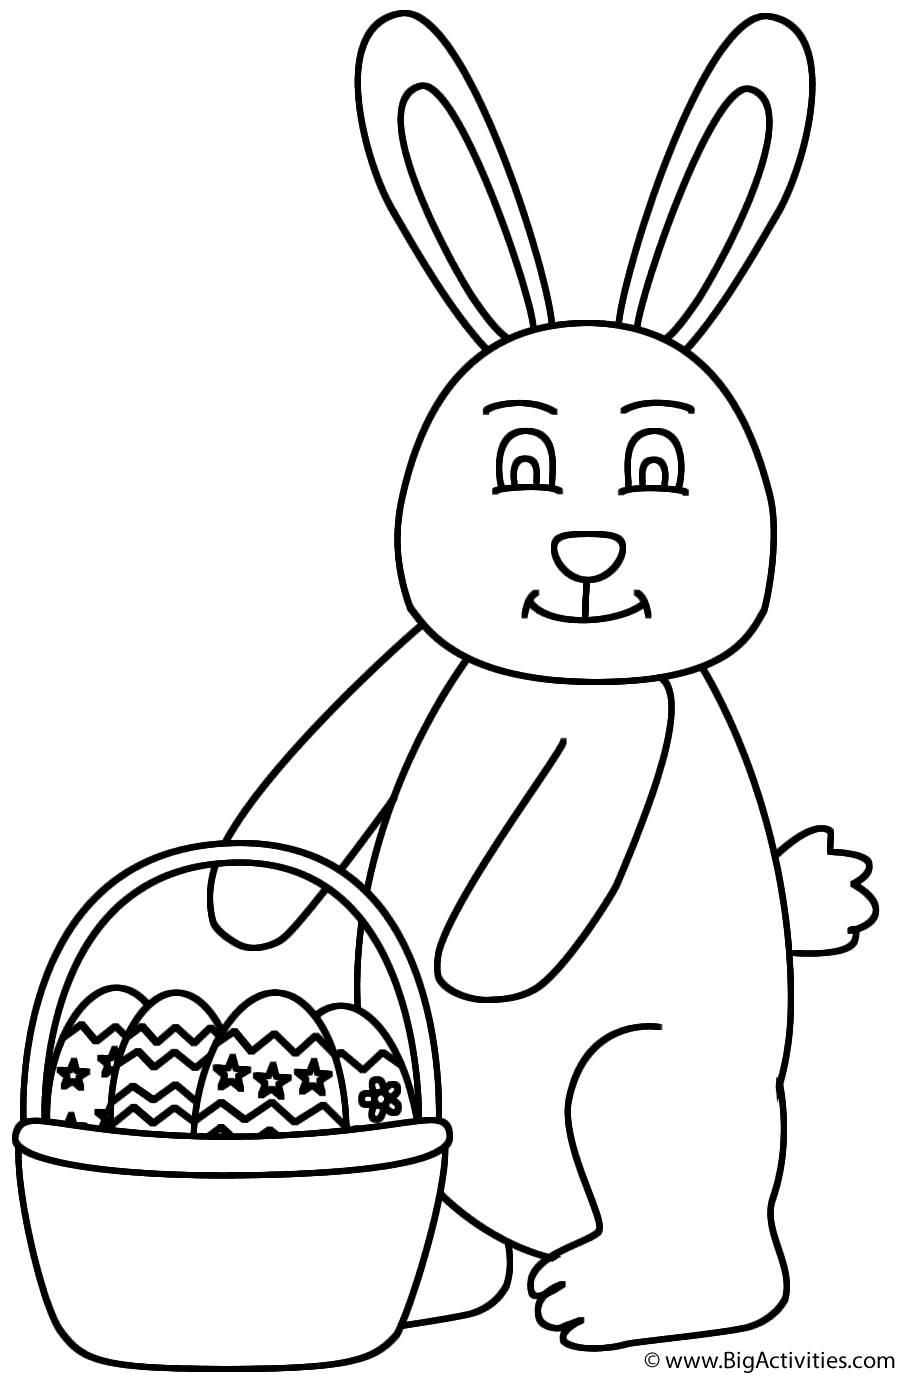 Easter Bunny holding Basket of Easter Eggs - Coloring Page (Easter)